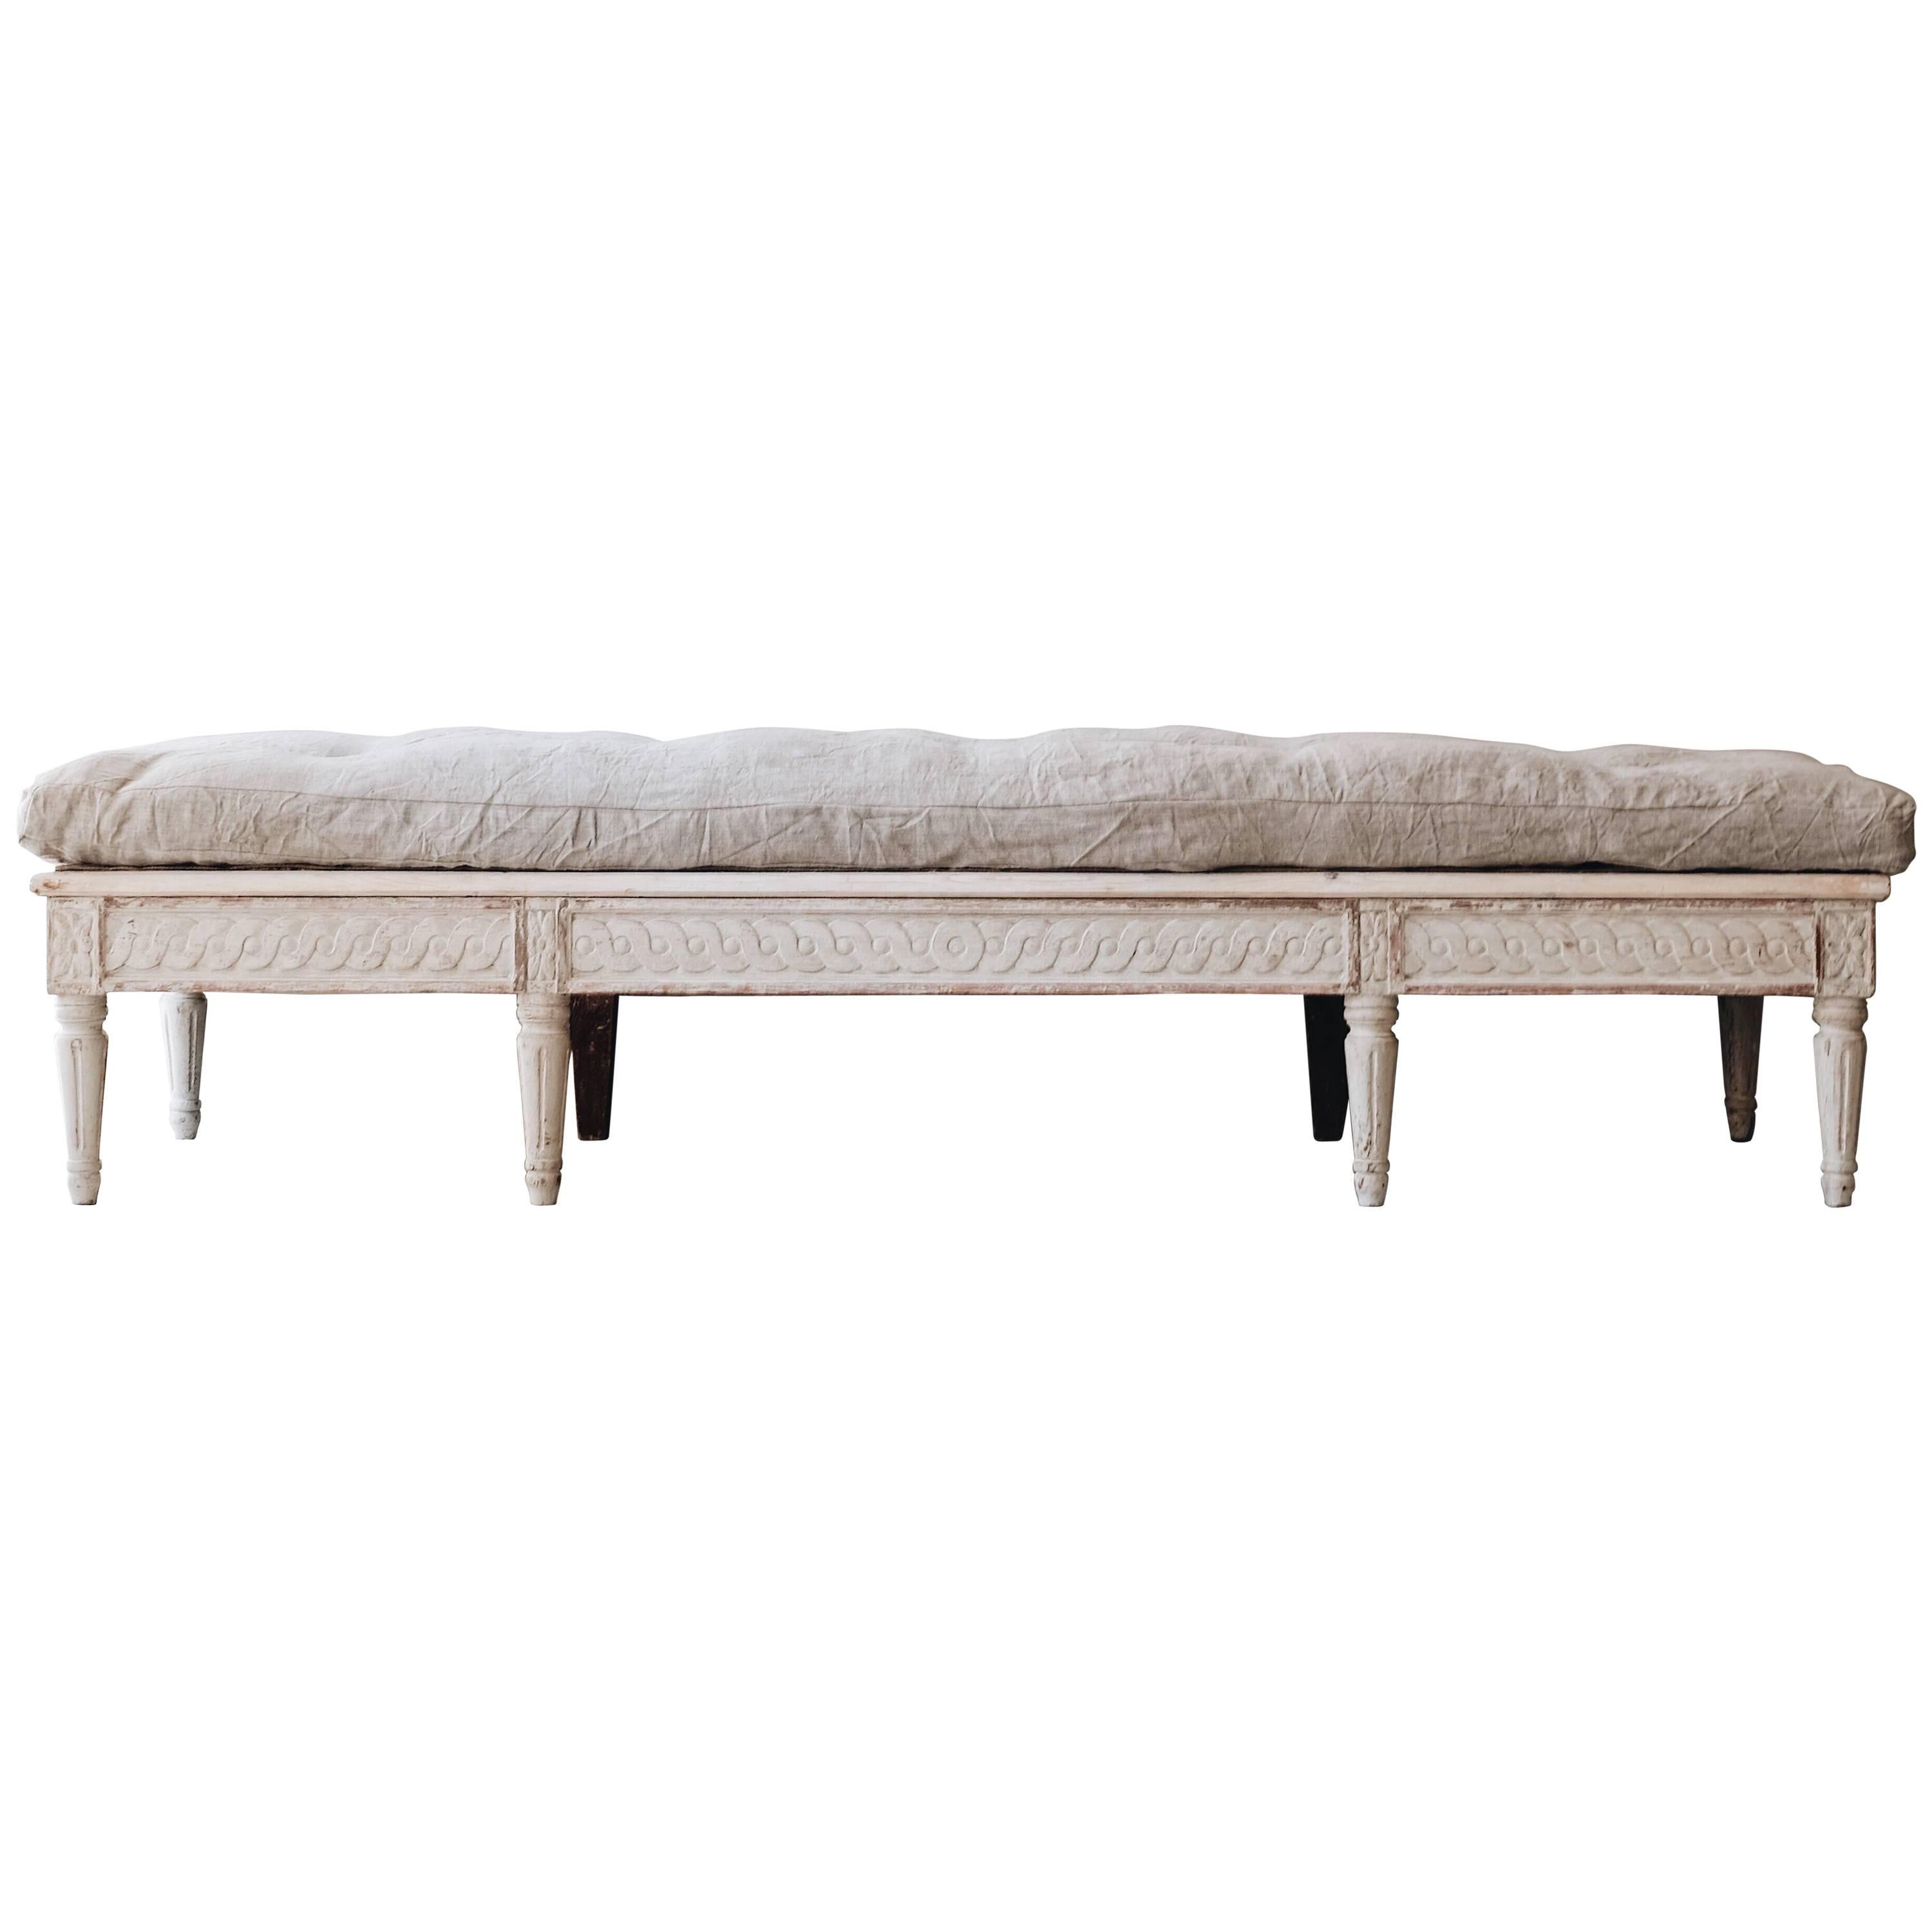 19th Century Gustavian Bench or Daybed